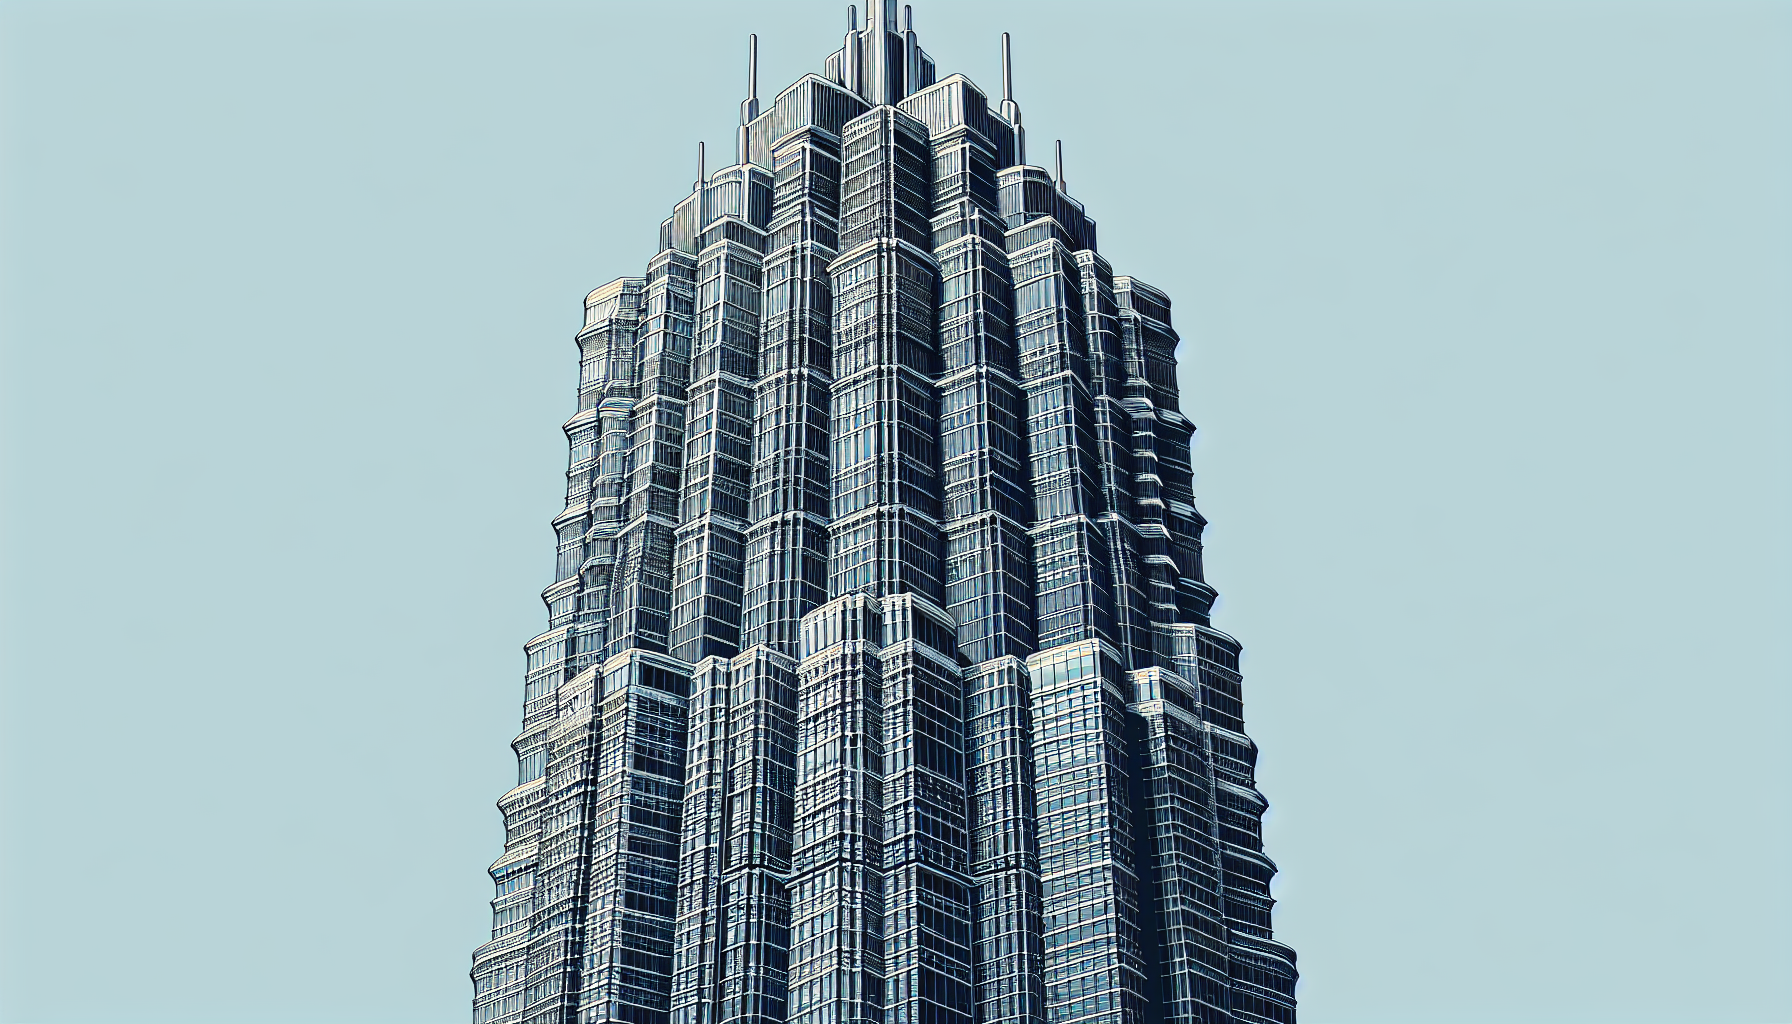 What Are The 10 Tallest Buildings In The World?